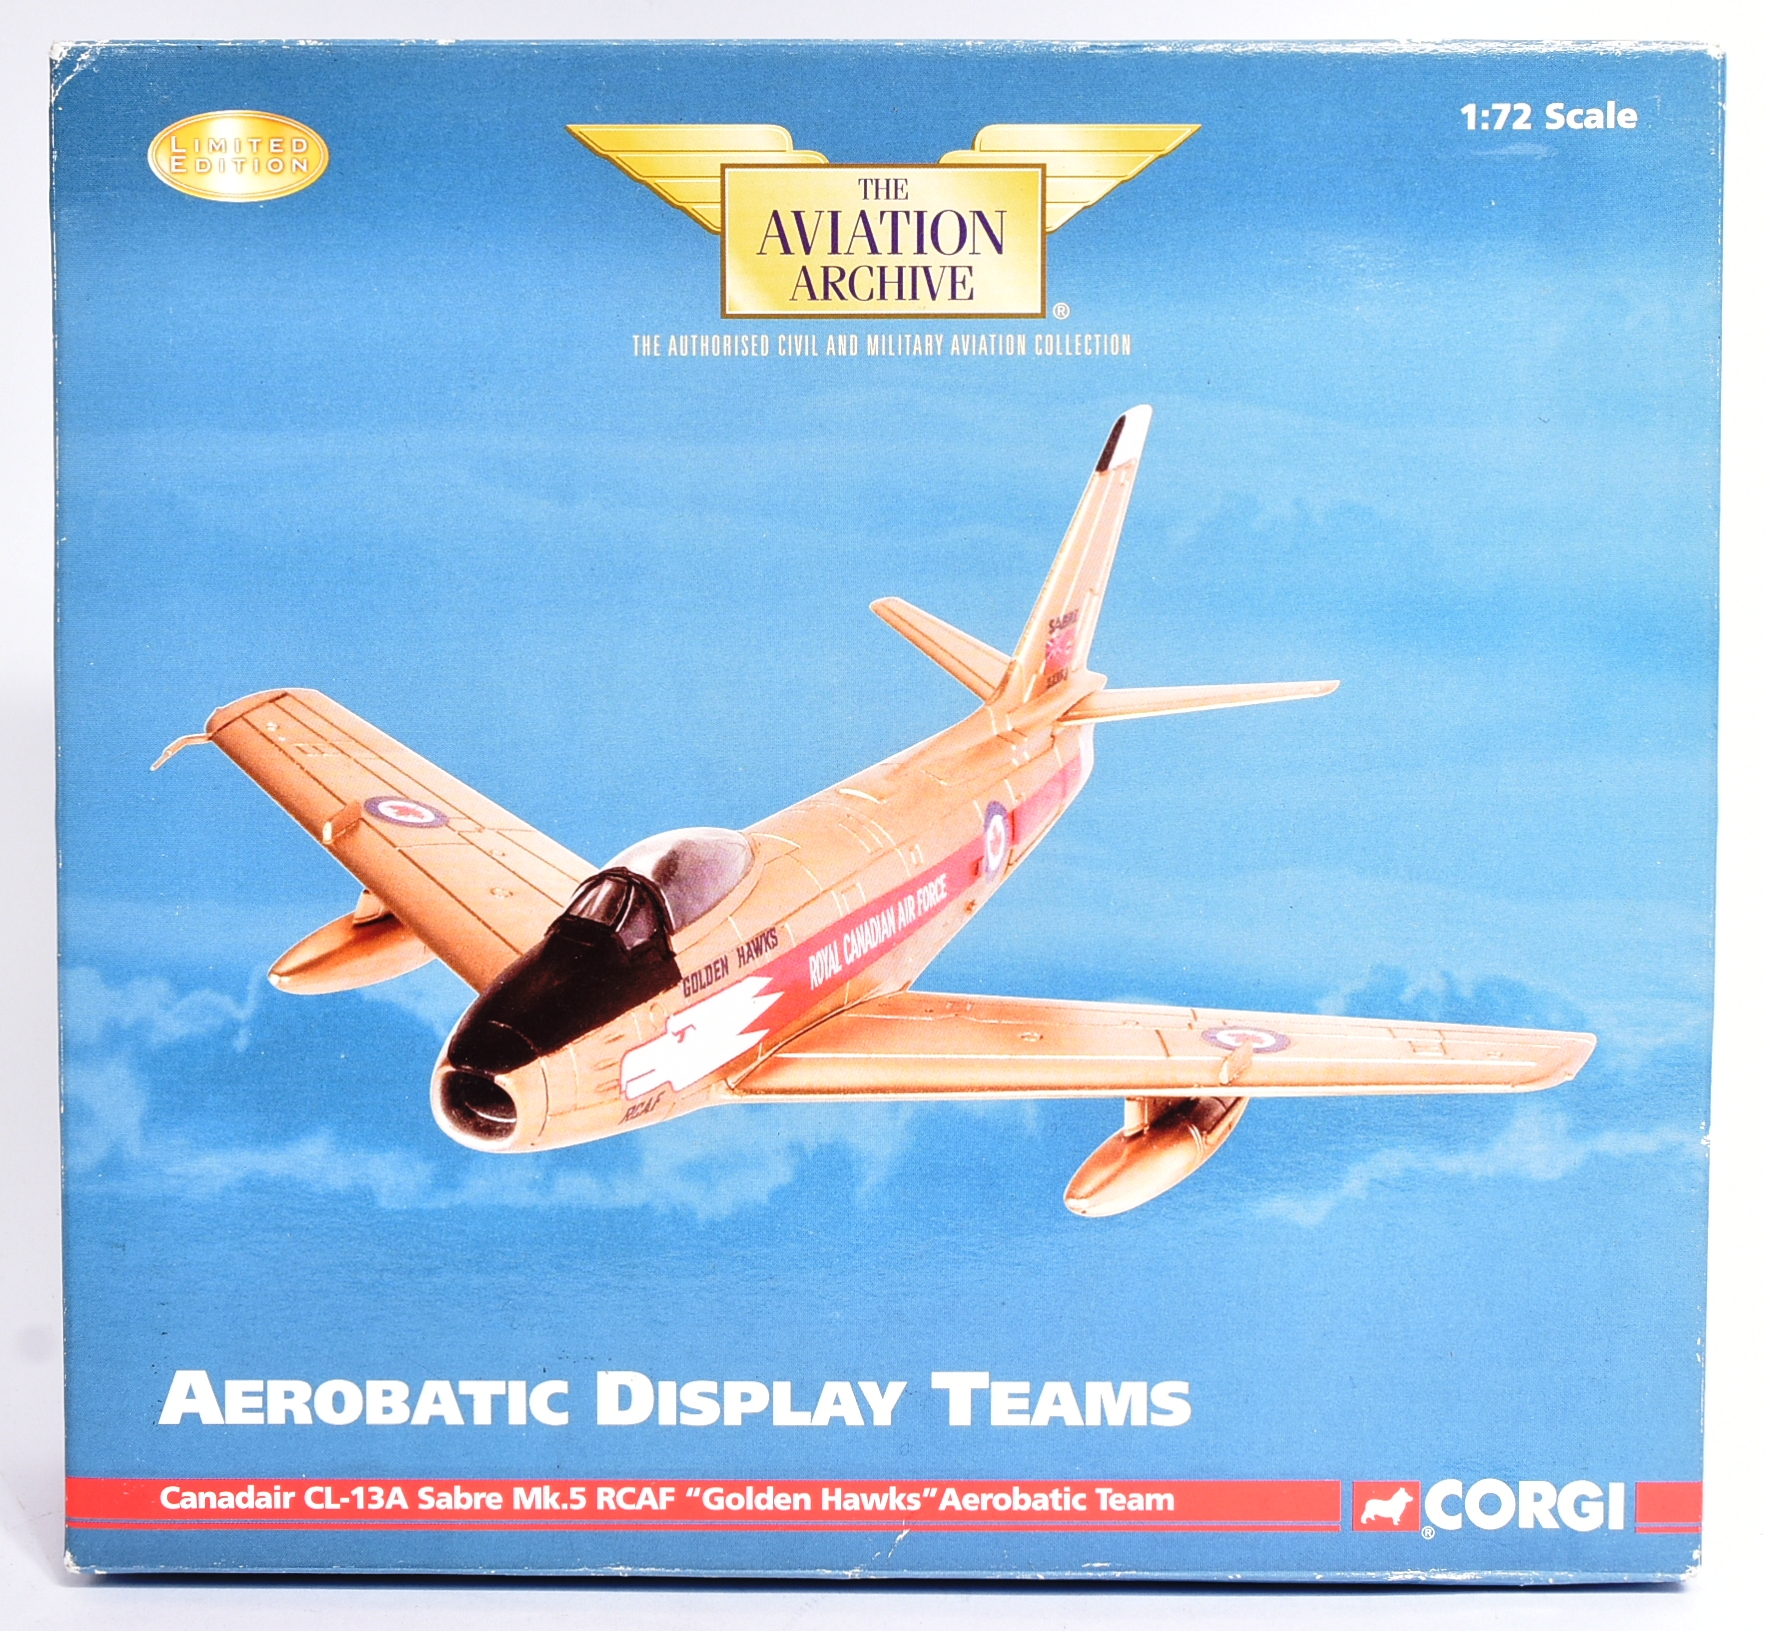 DIECAST - X2 AVIATION ARCHIVE 1/72 SCALE AEROBATIC DISPLAY TEAMS - Image 4 of 5